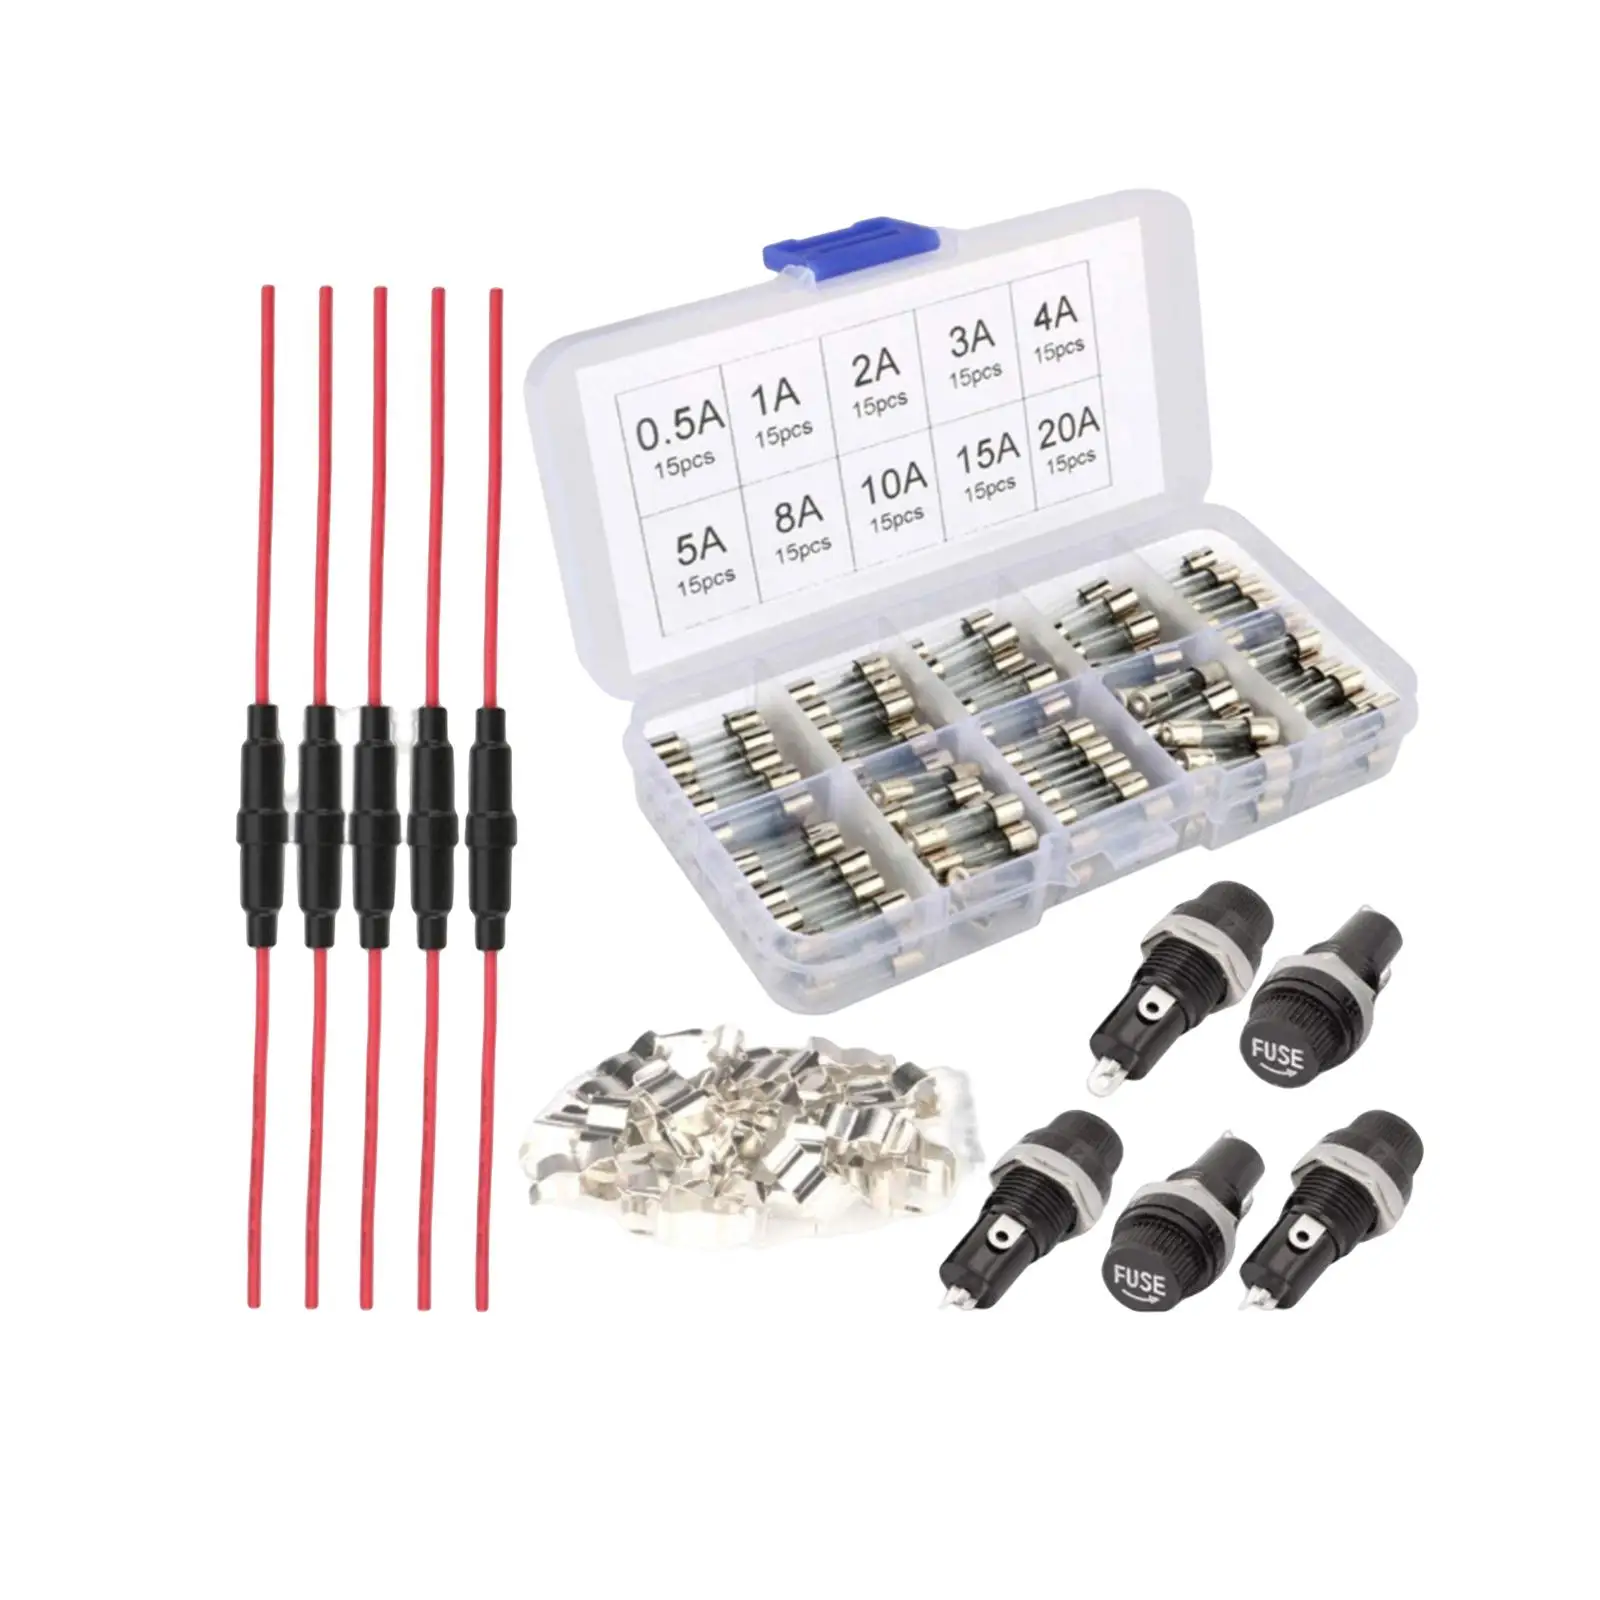 150x Fast Blow Glass Fuses 5x20mm for Premium Portable High Performance